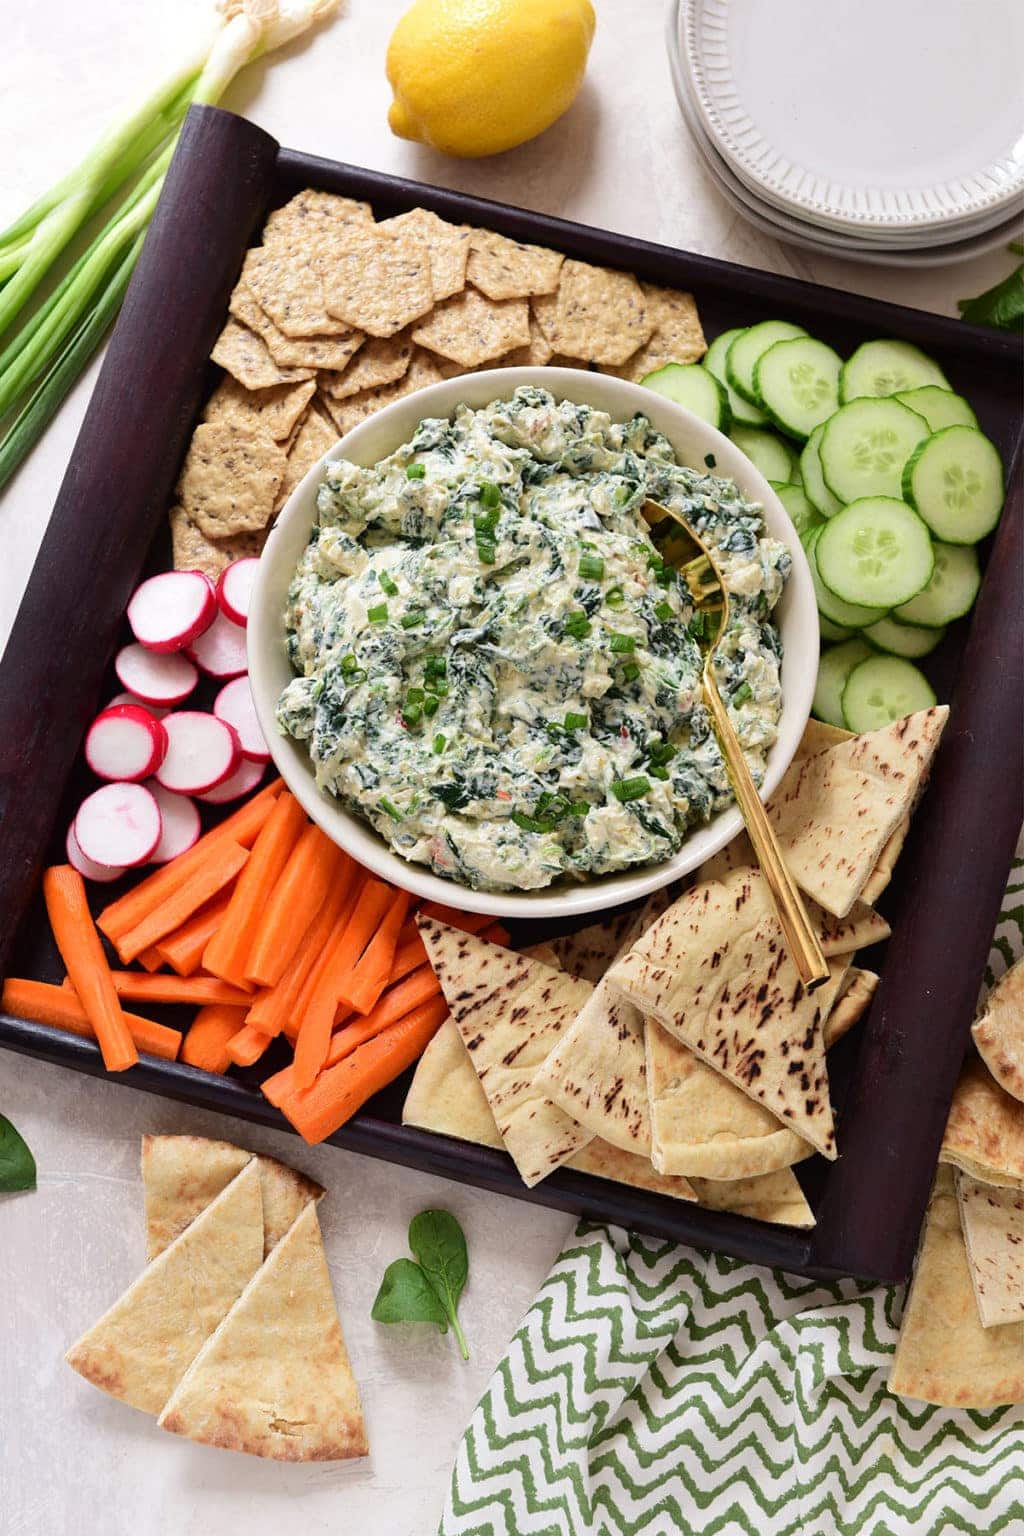 Spinach Dip With Knorr Vegetable Recipe Mix - TidyMom®